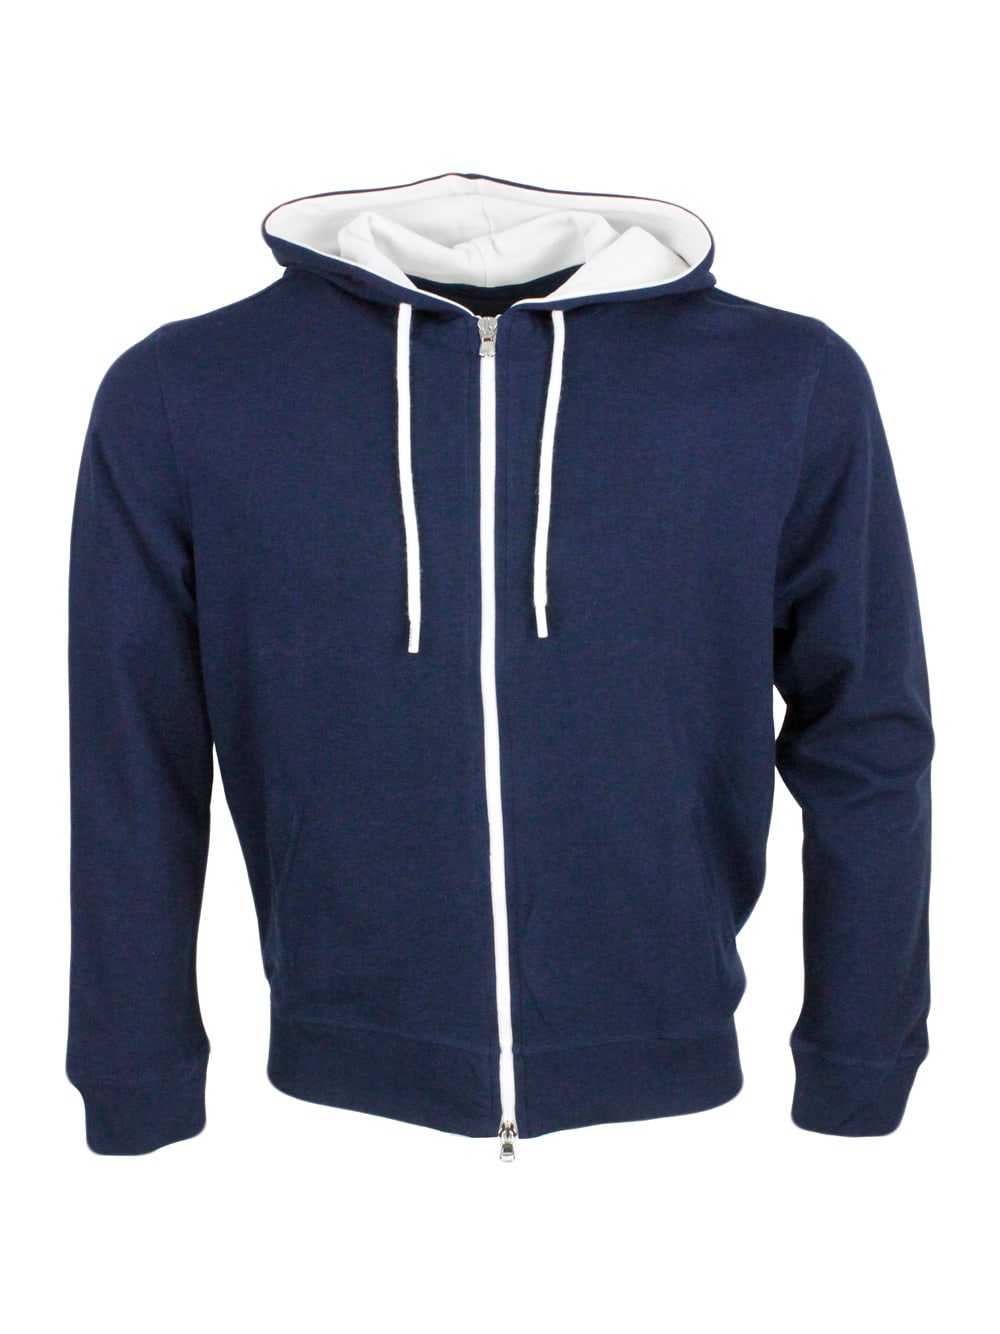 Lightweight Stretch Cotton Sweatshirt With Hood With Contrasting Color Interior And Zip Closure